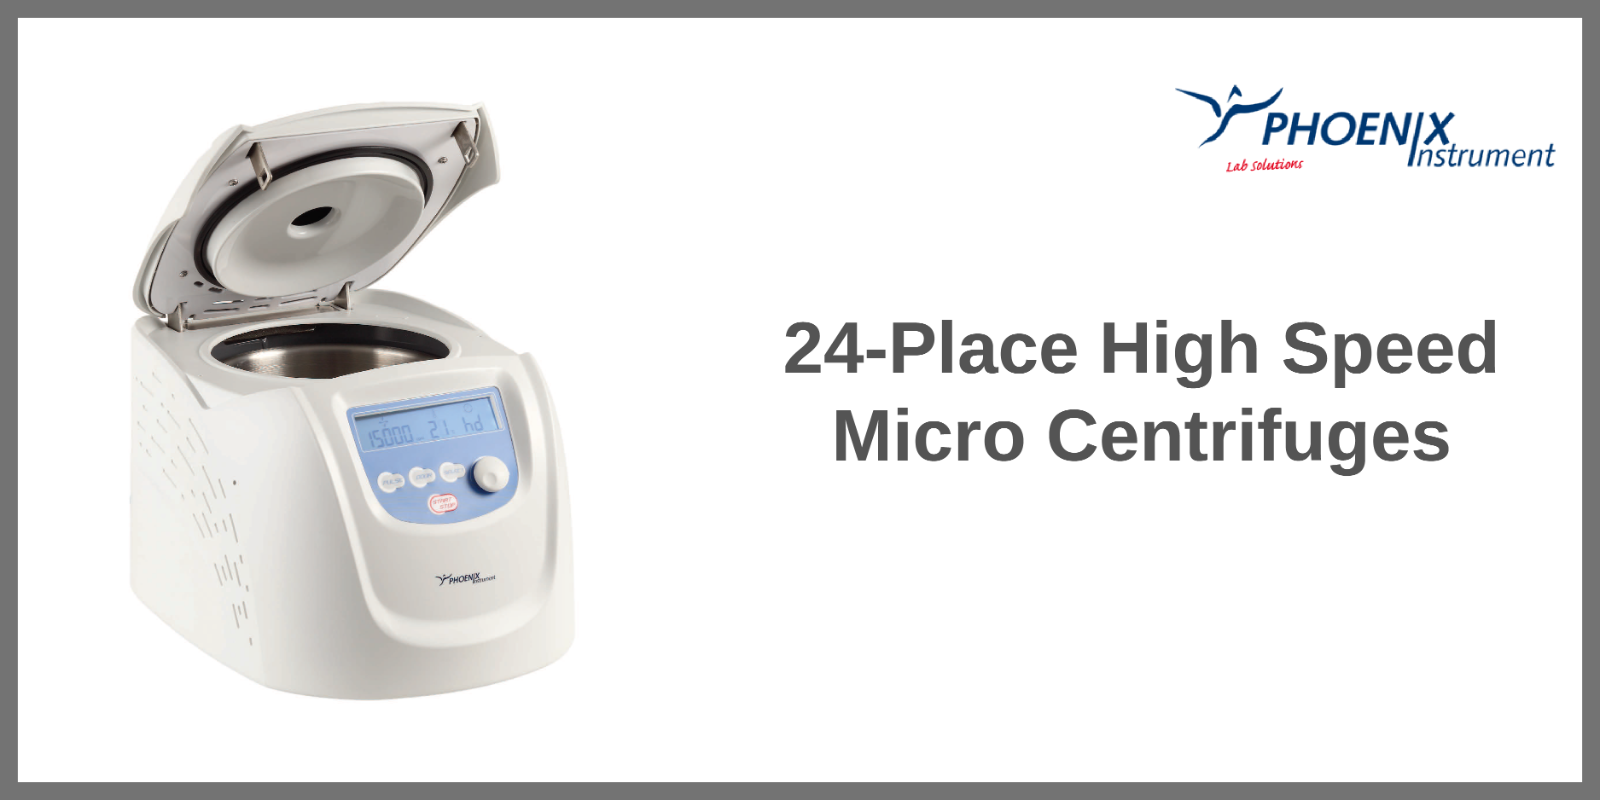 24-Place High Speed Micro Centrifuges